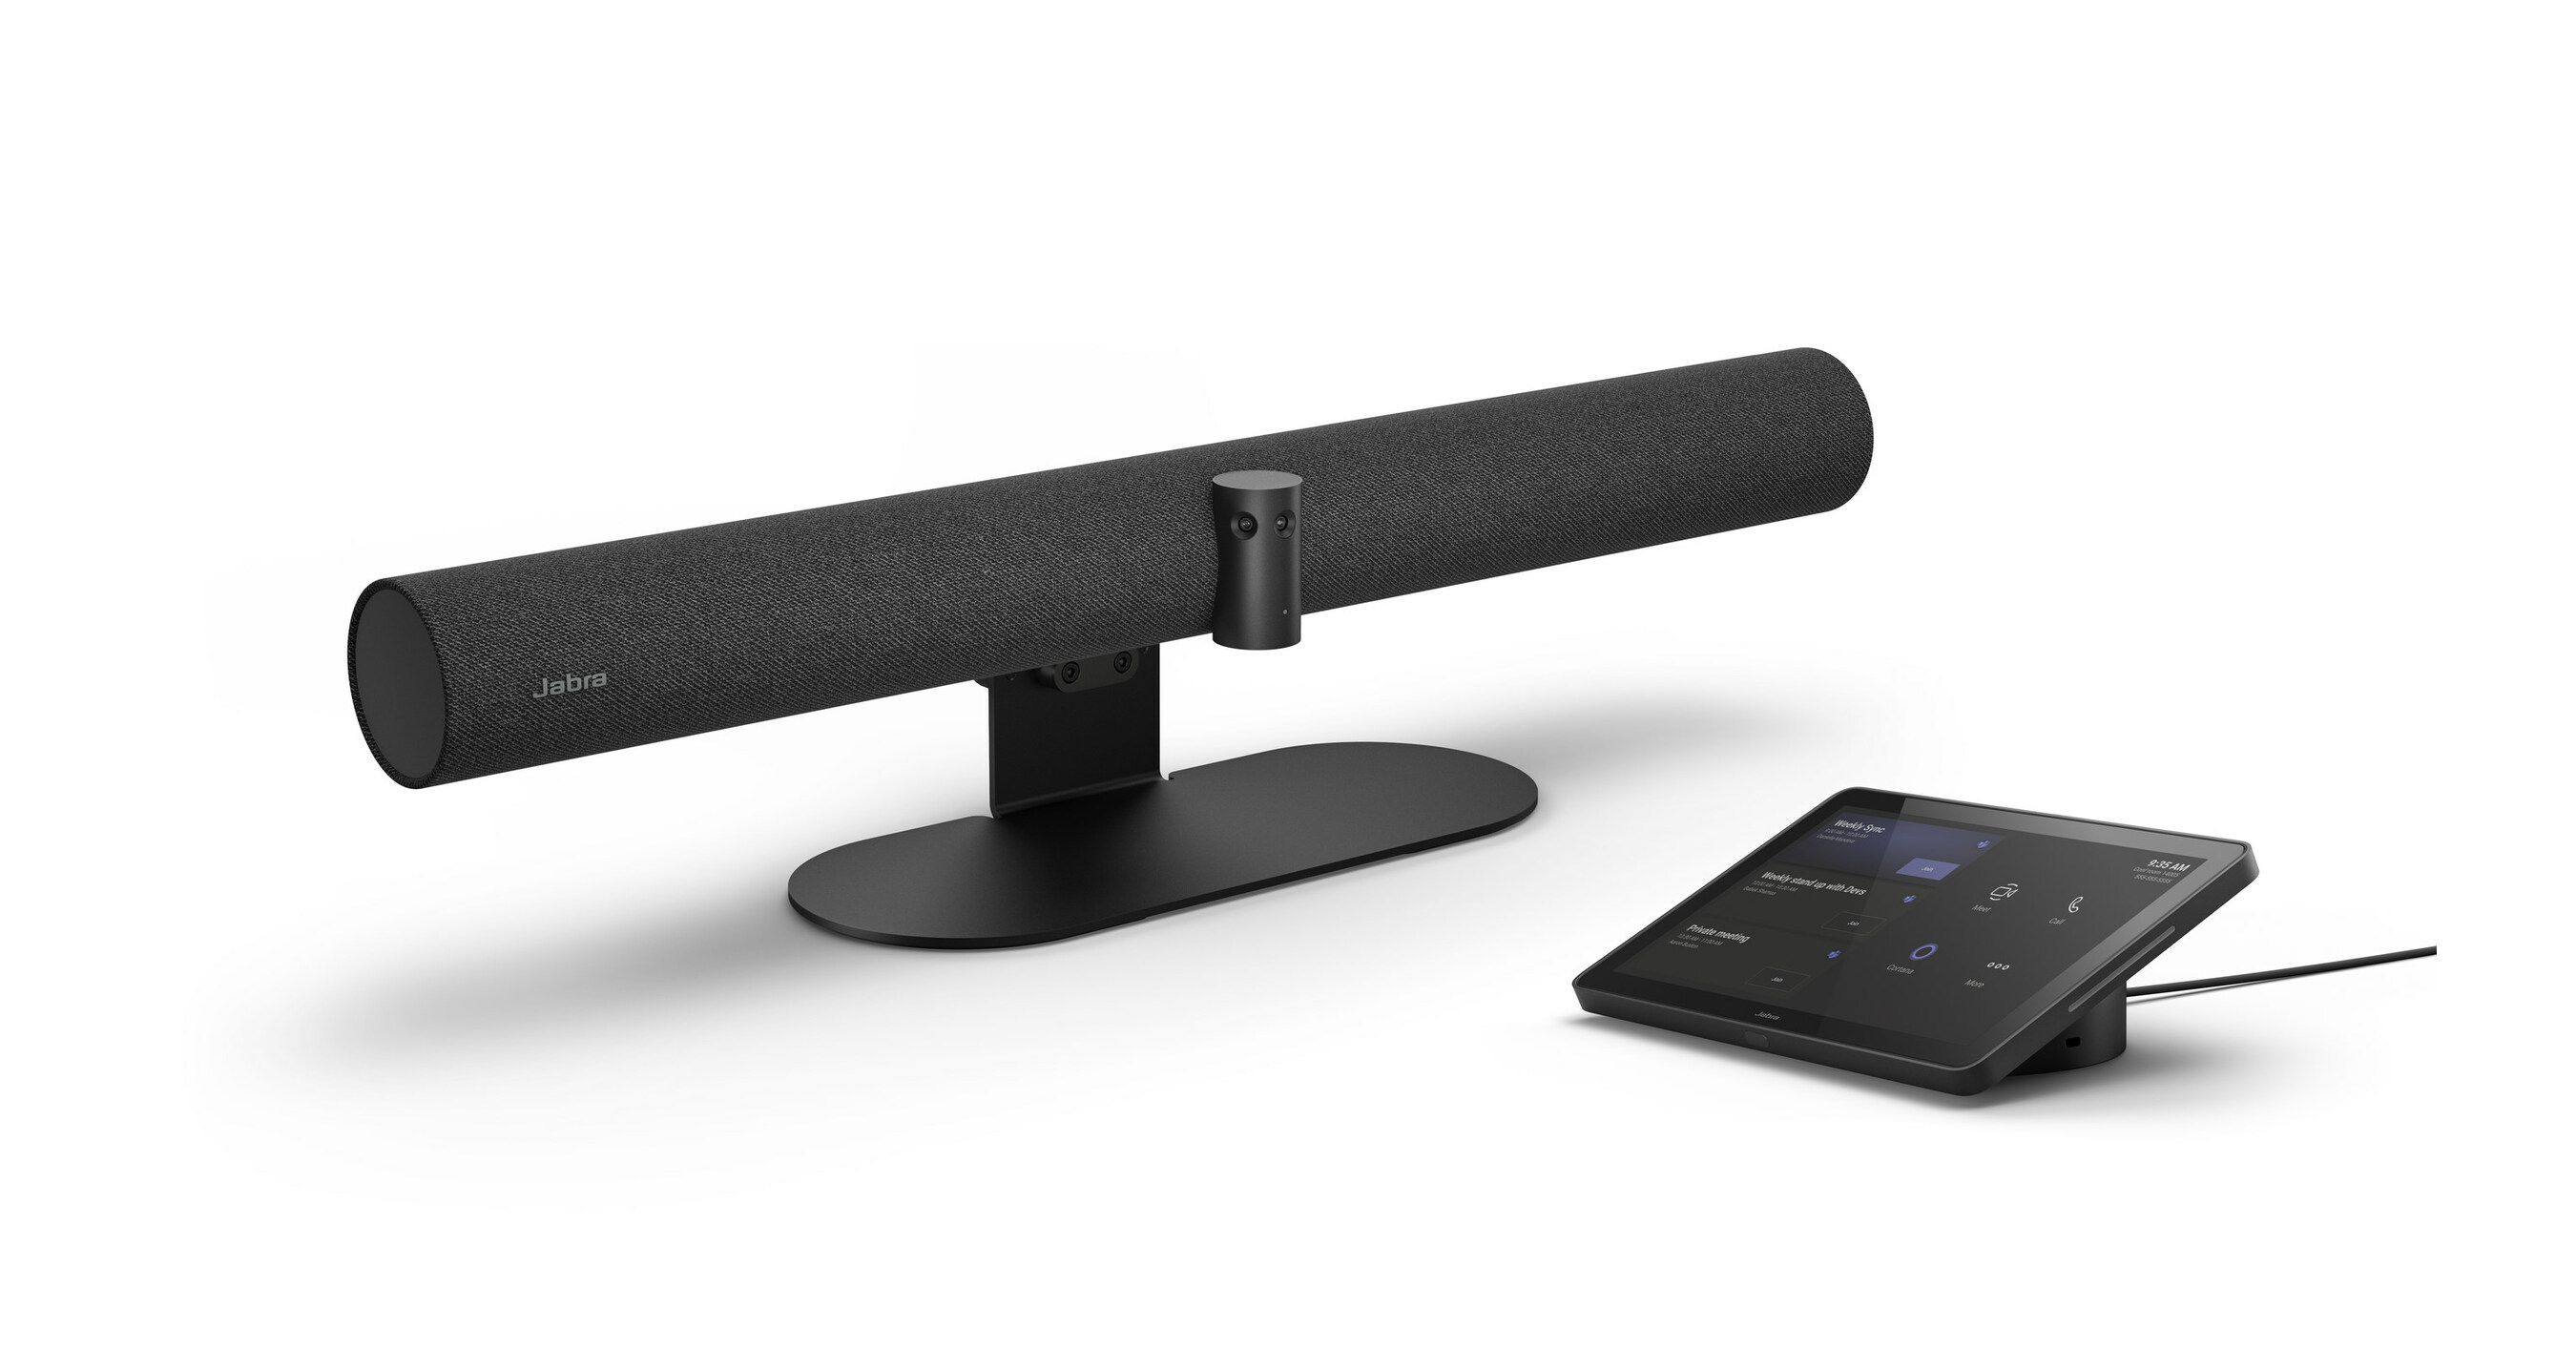 hybrid launches meeting 50 to facilitate Bar Video next-level Jabra PanaCast System experiences